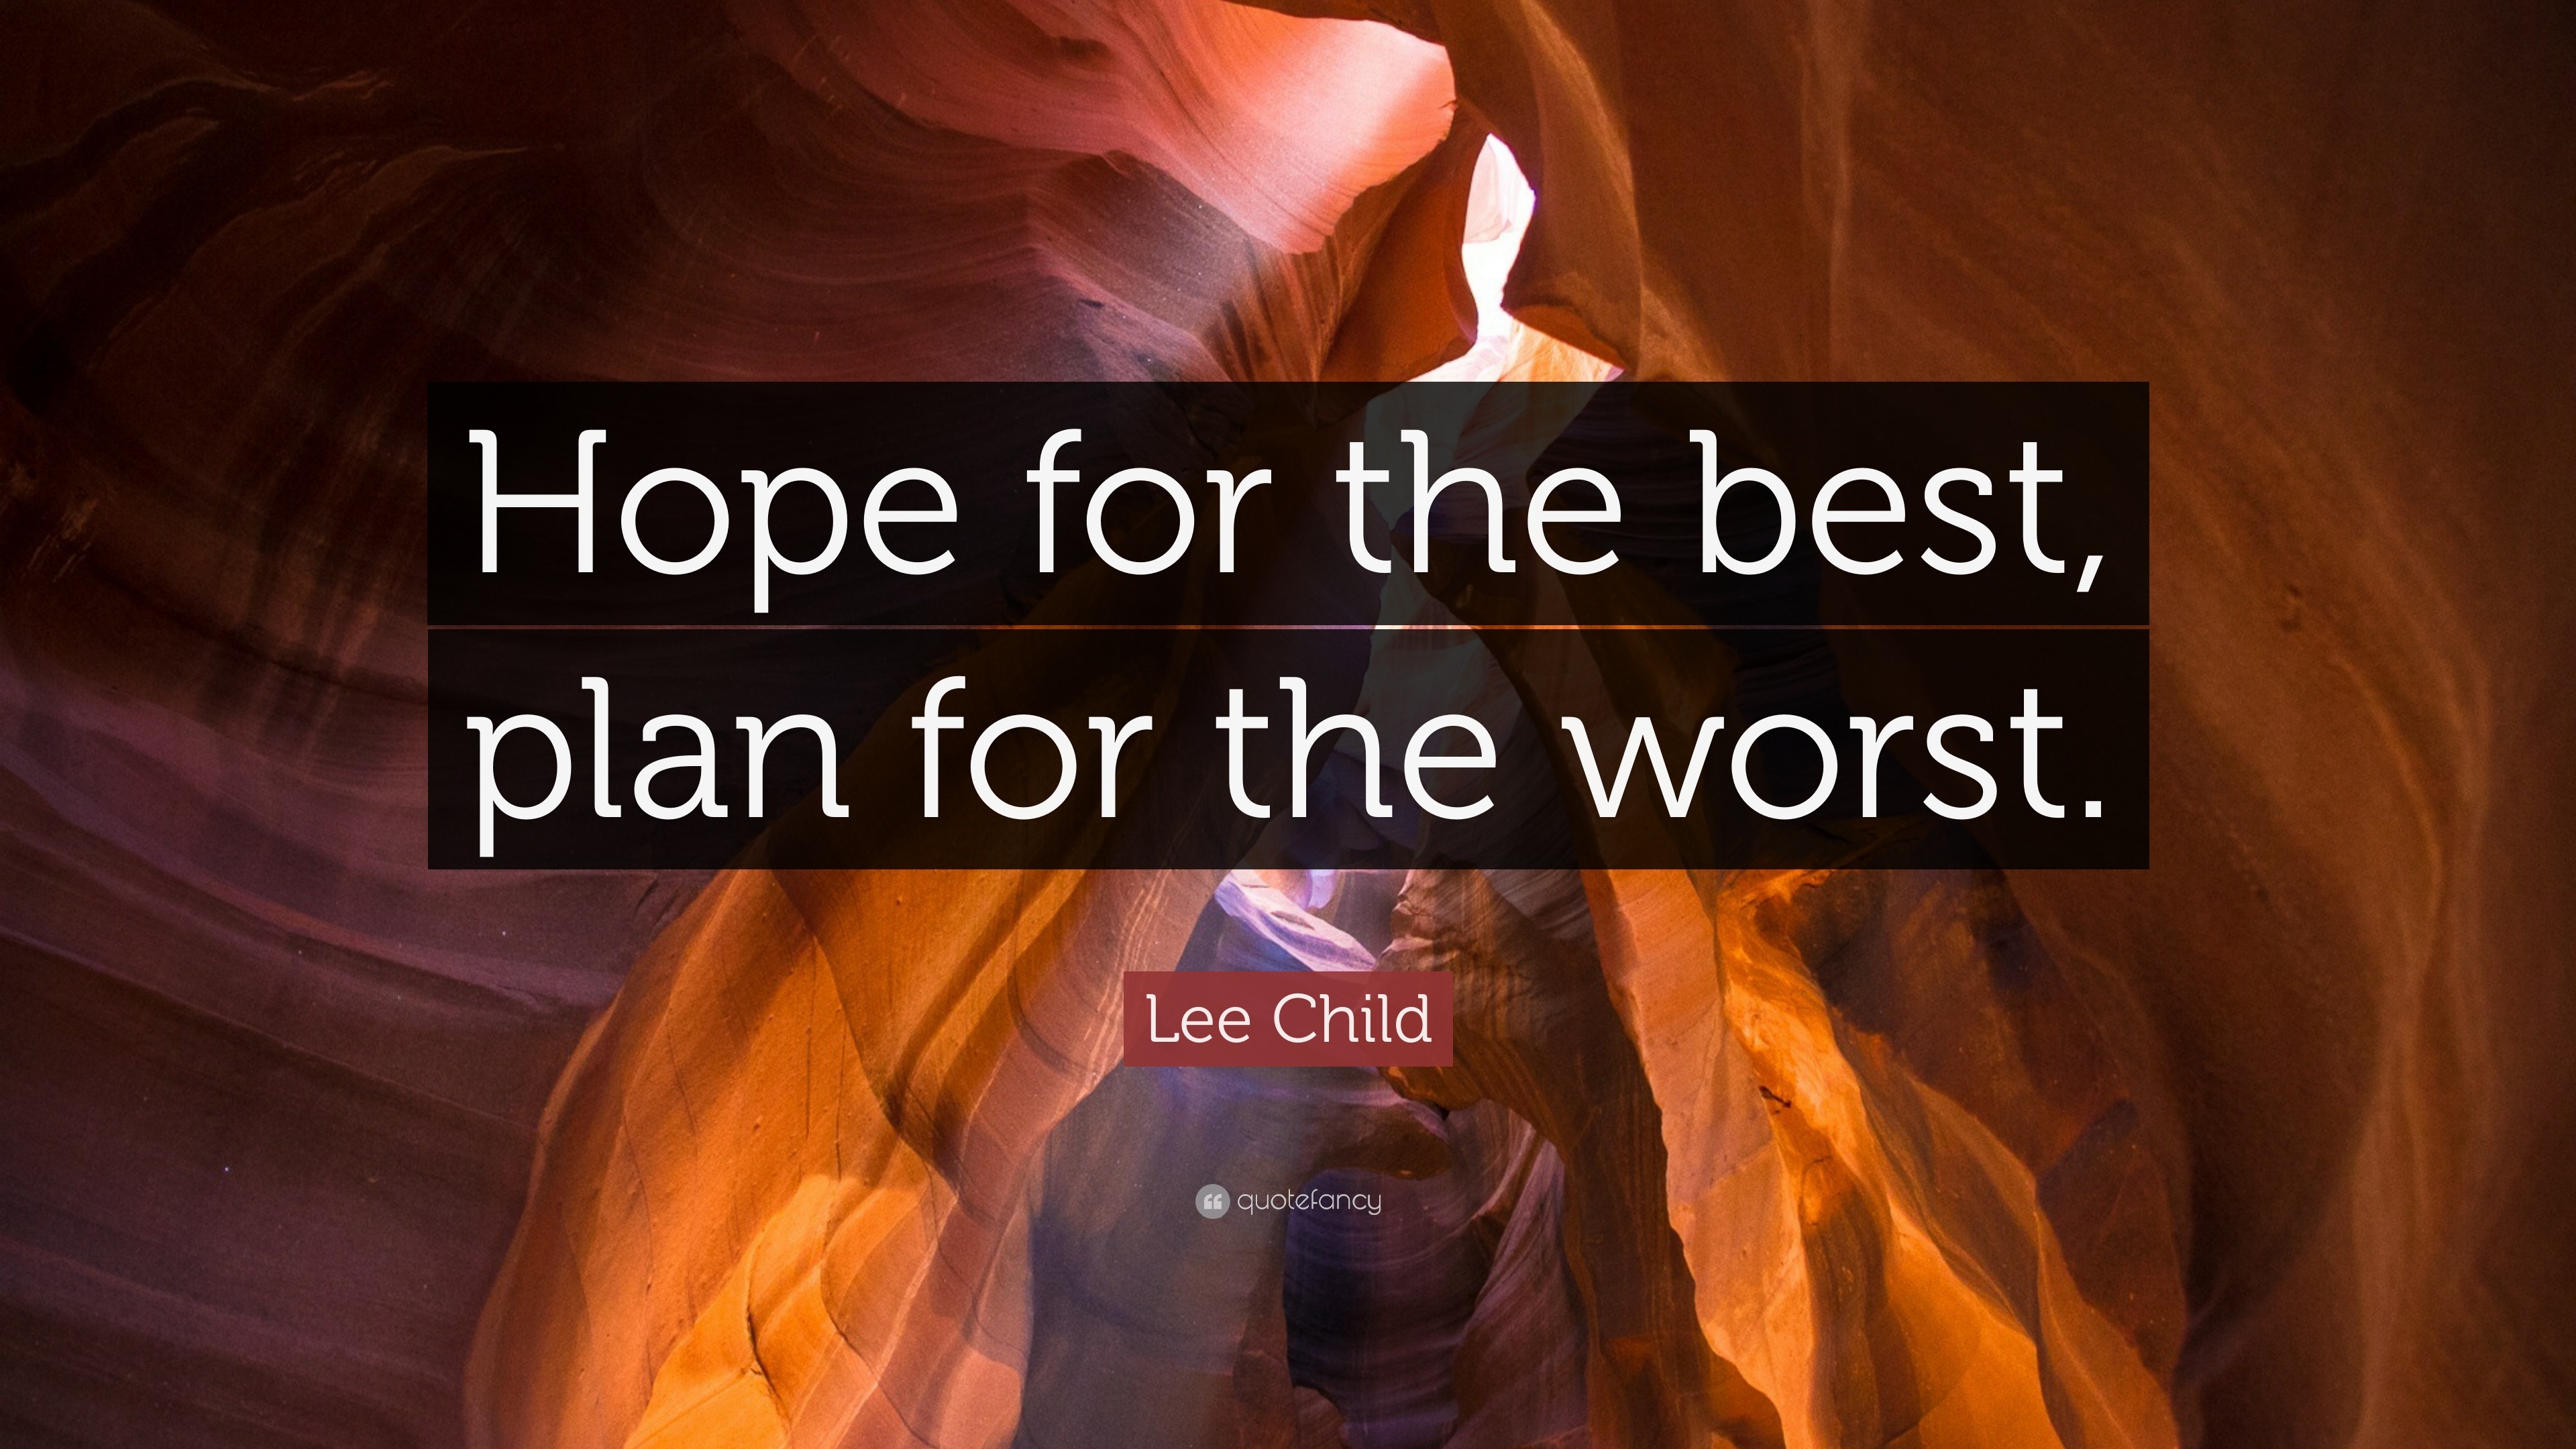 Lee Child Quote: “Hope for the best, plan for the worst.”